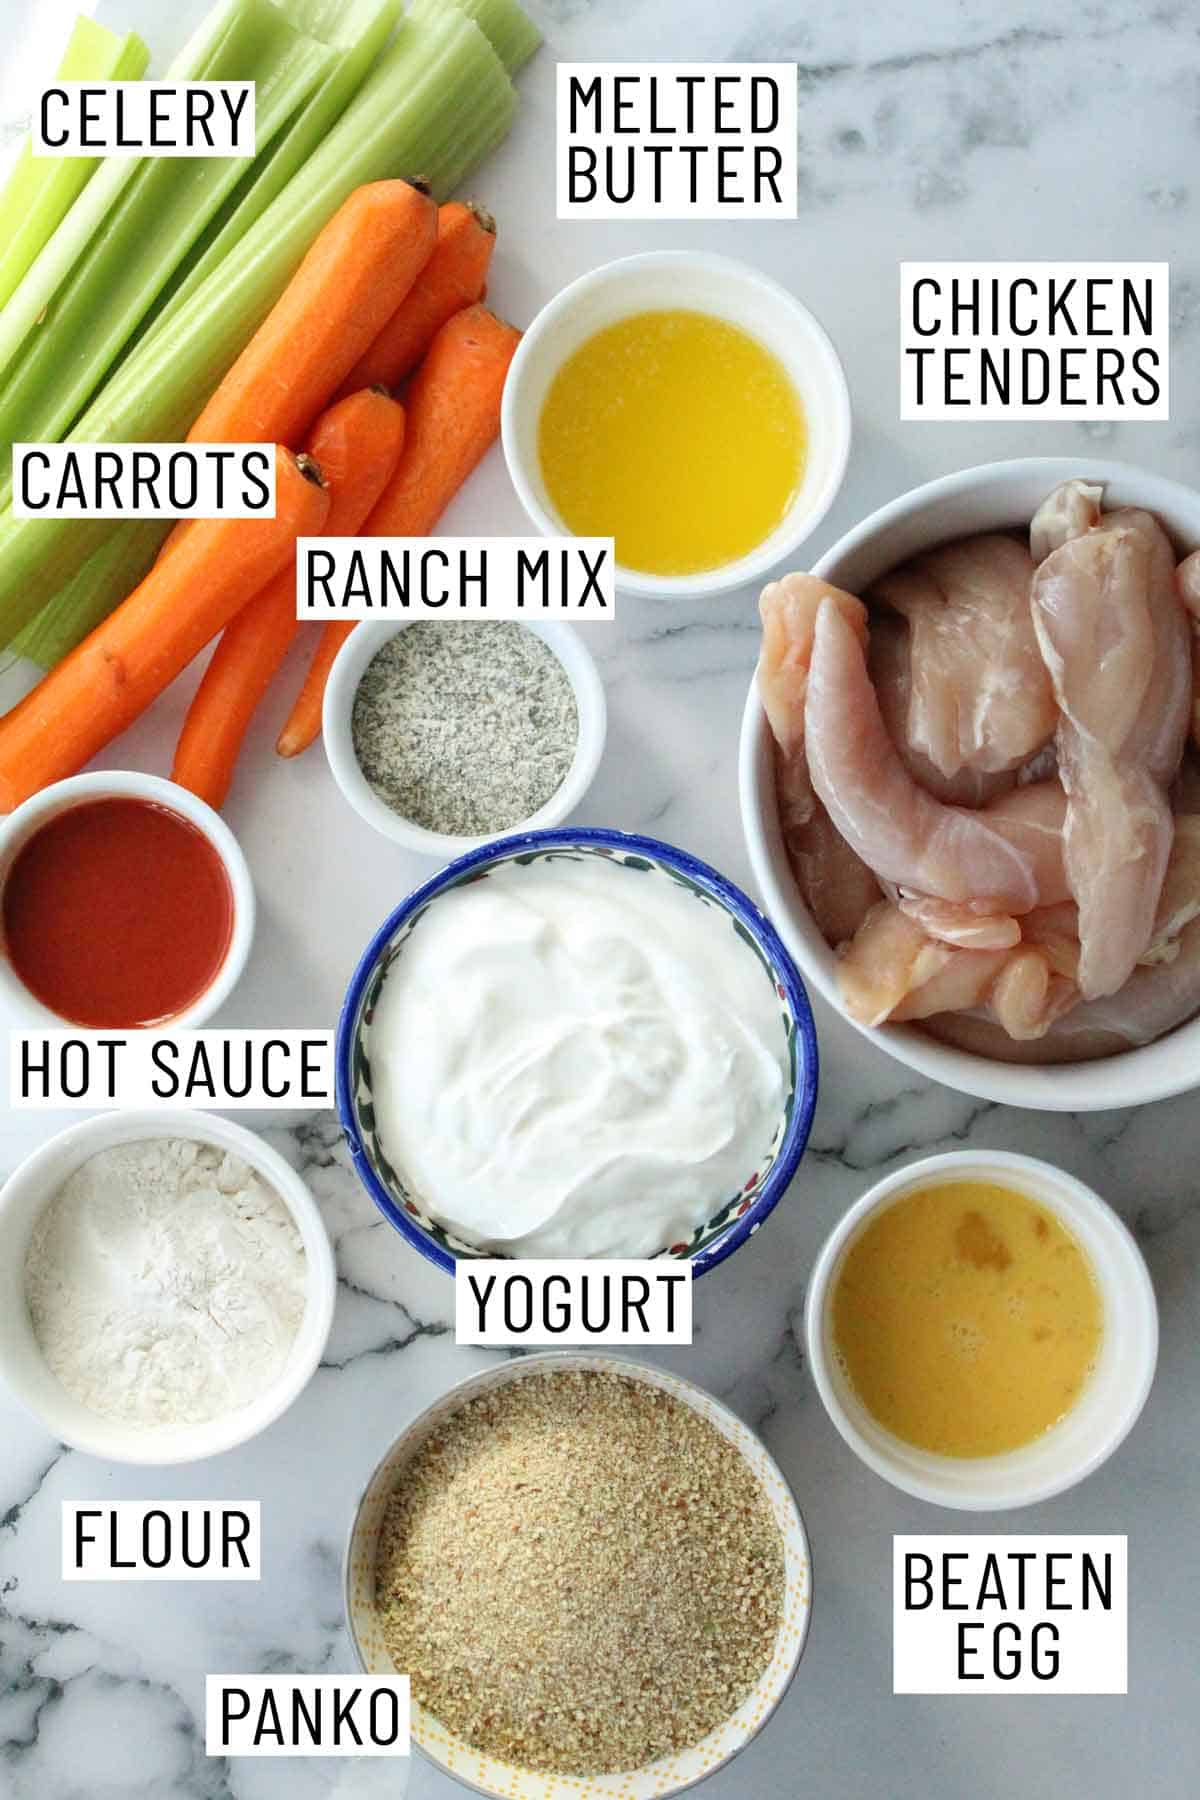 Ingredients needed for buffalo chicken strips.